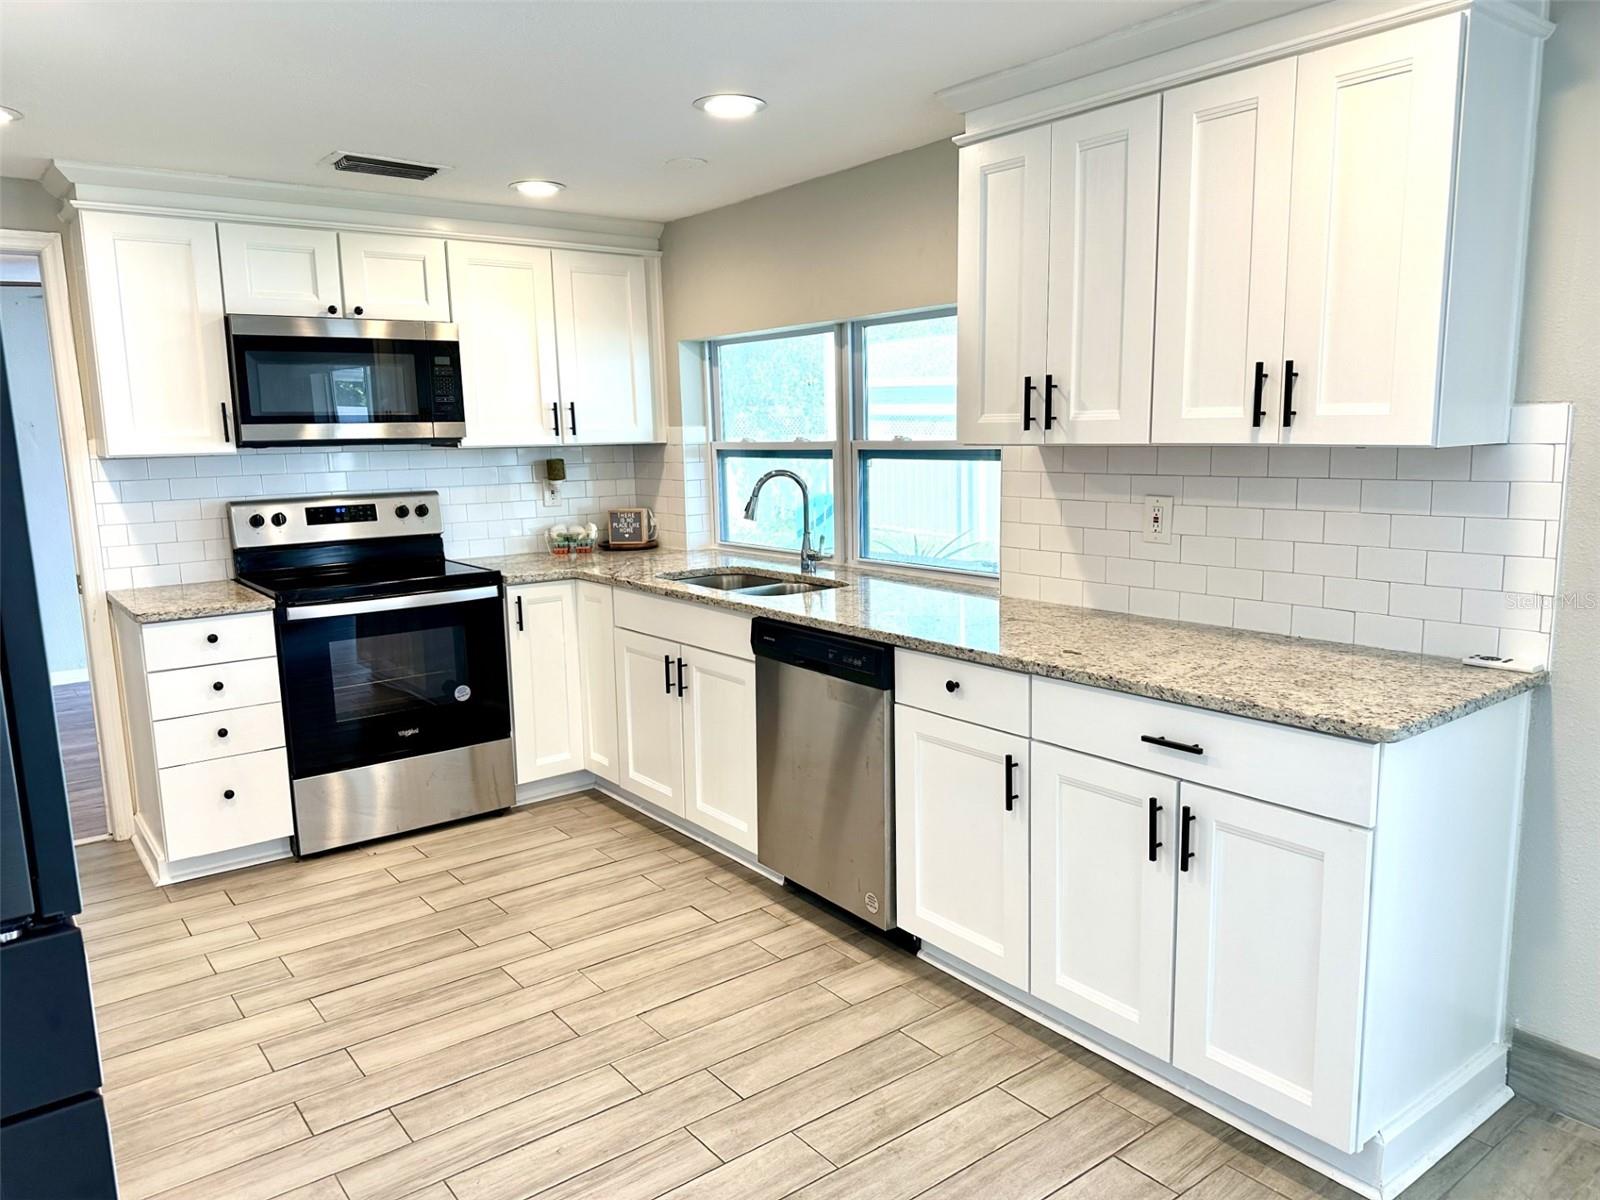 Beautiful Kitchen with granite countertops and lots of storage!